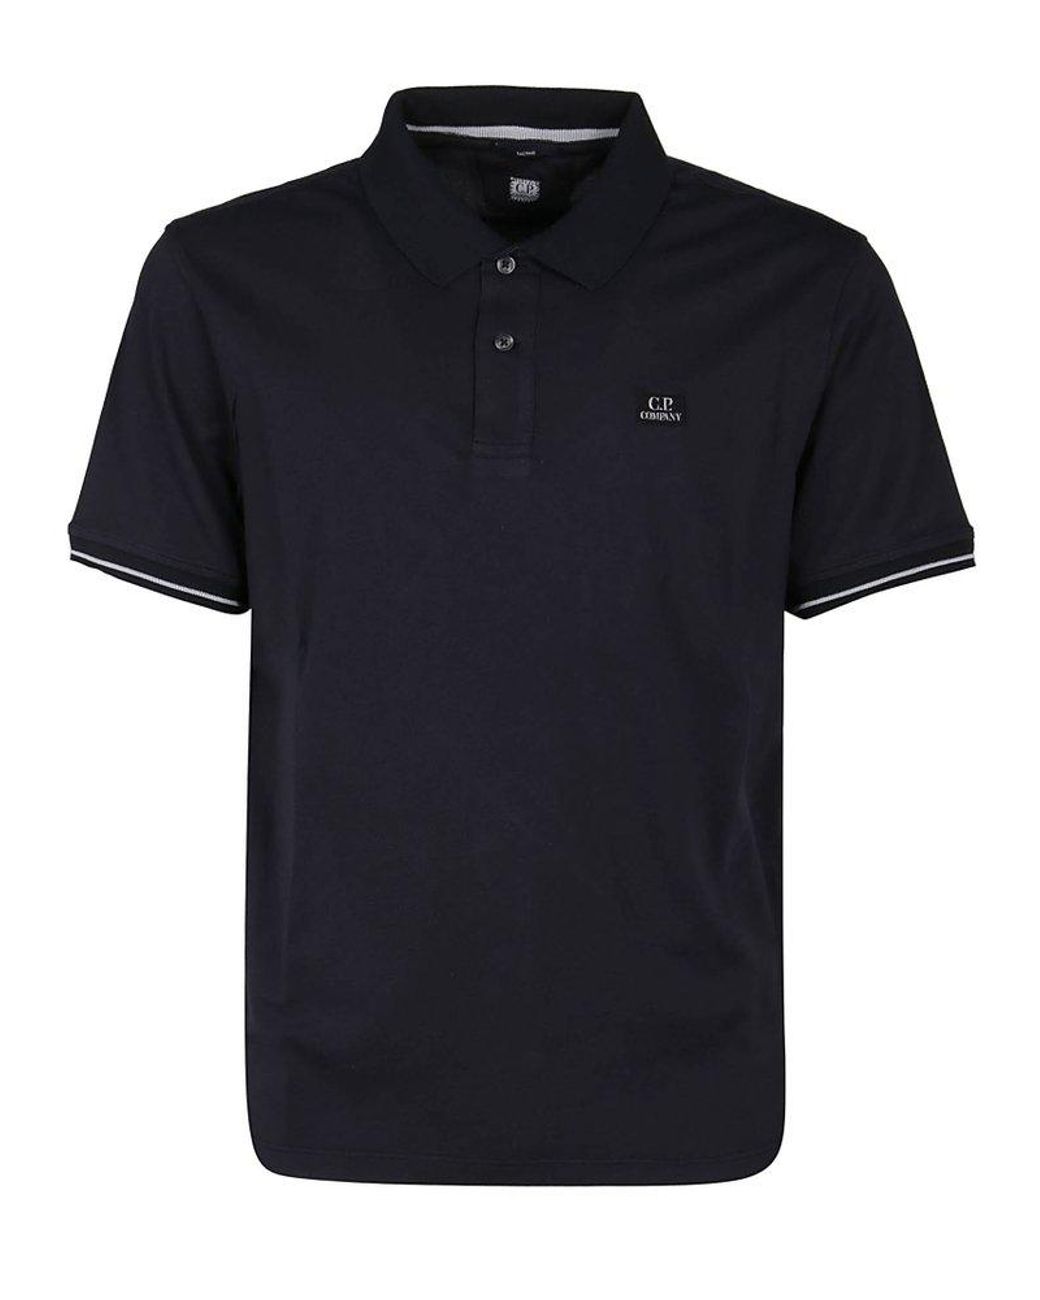 C.P. Company Tacting Logo Polo Shirt in Black for Men | Lyst